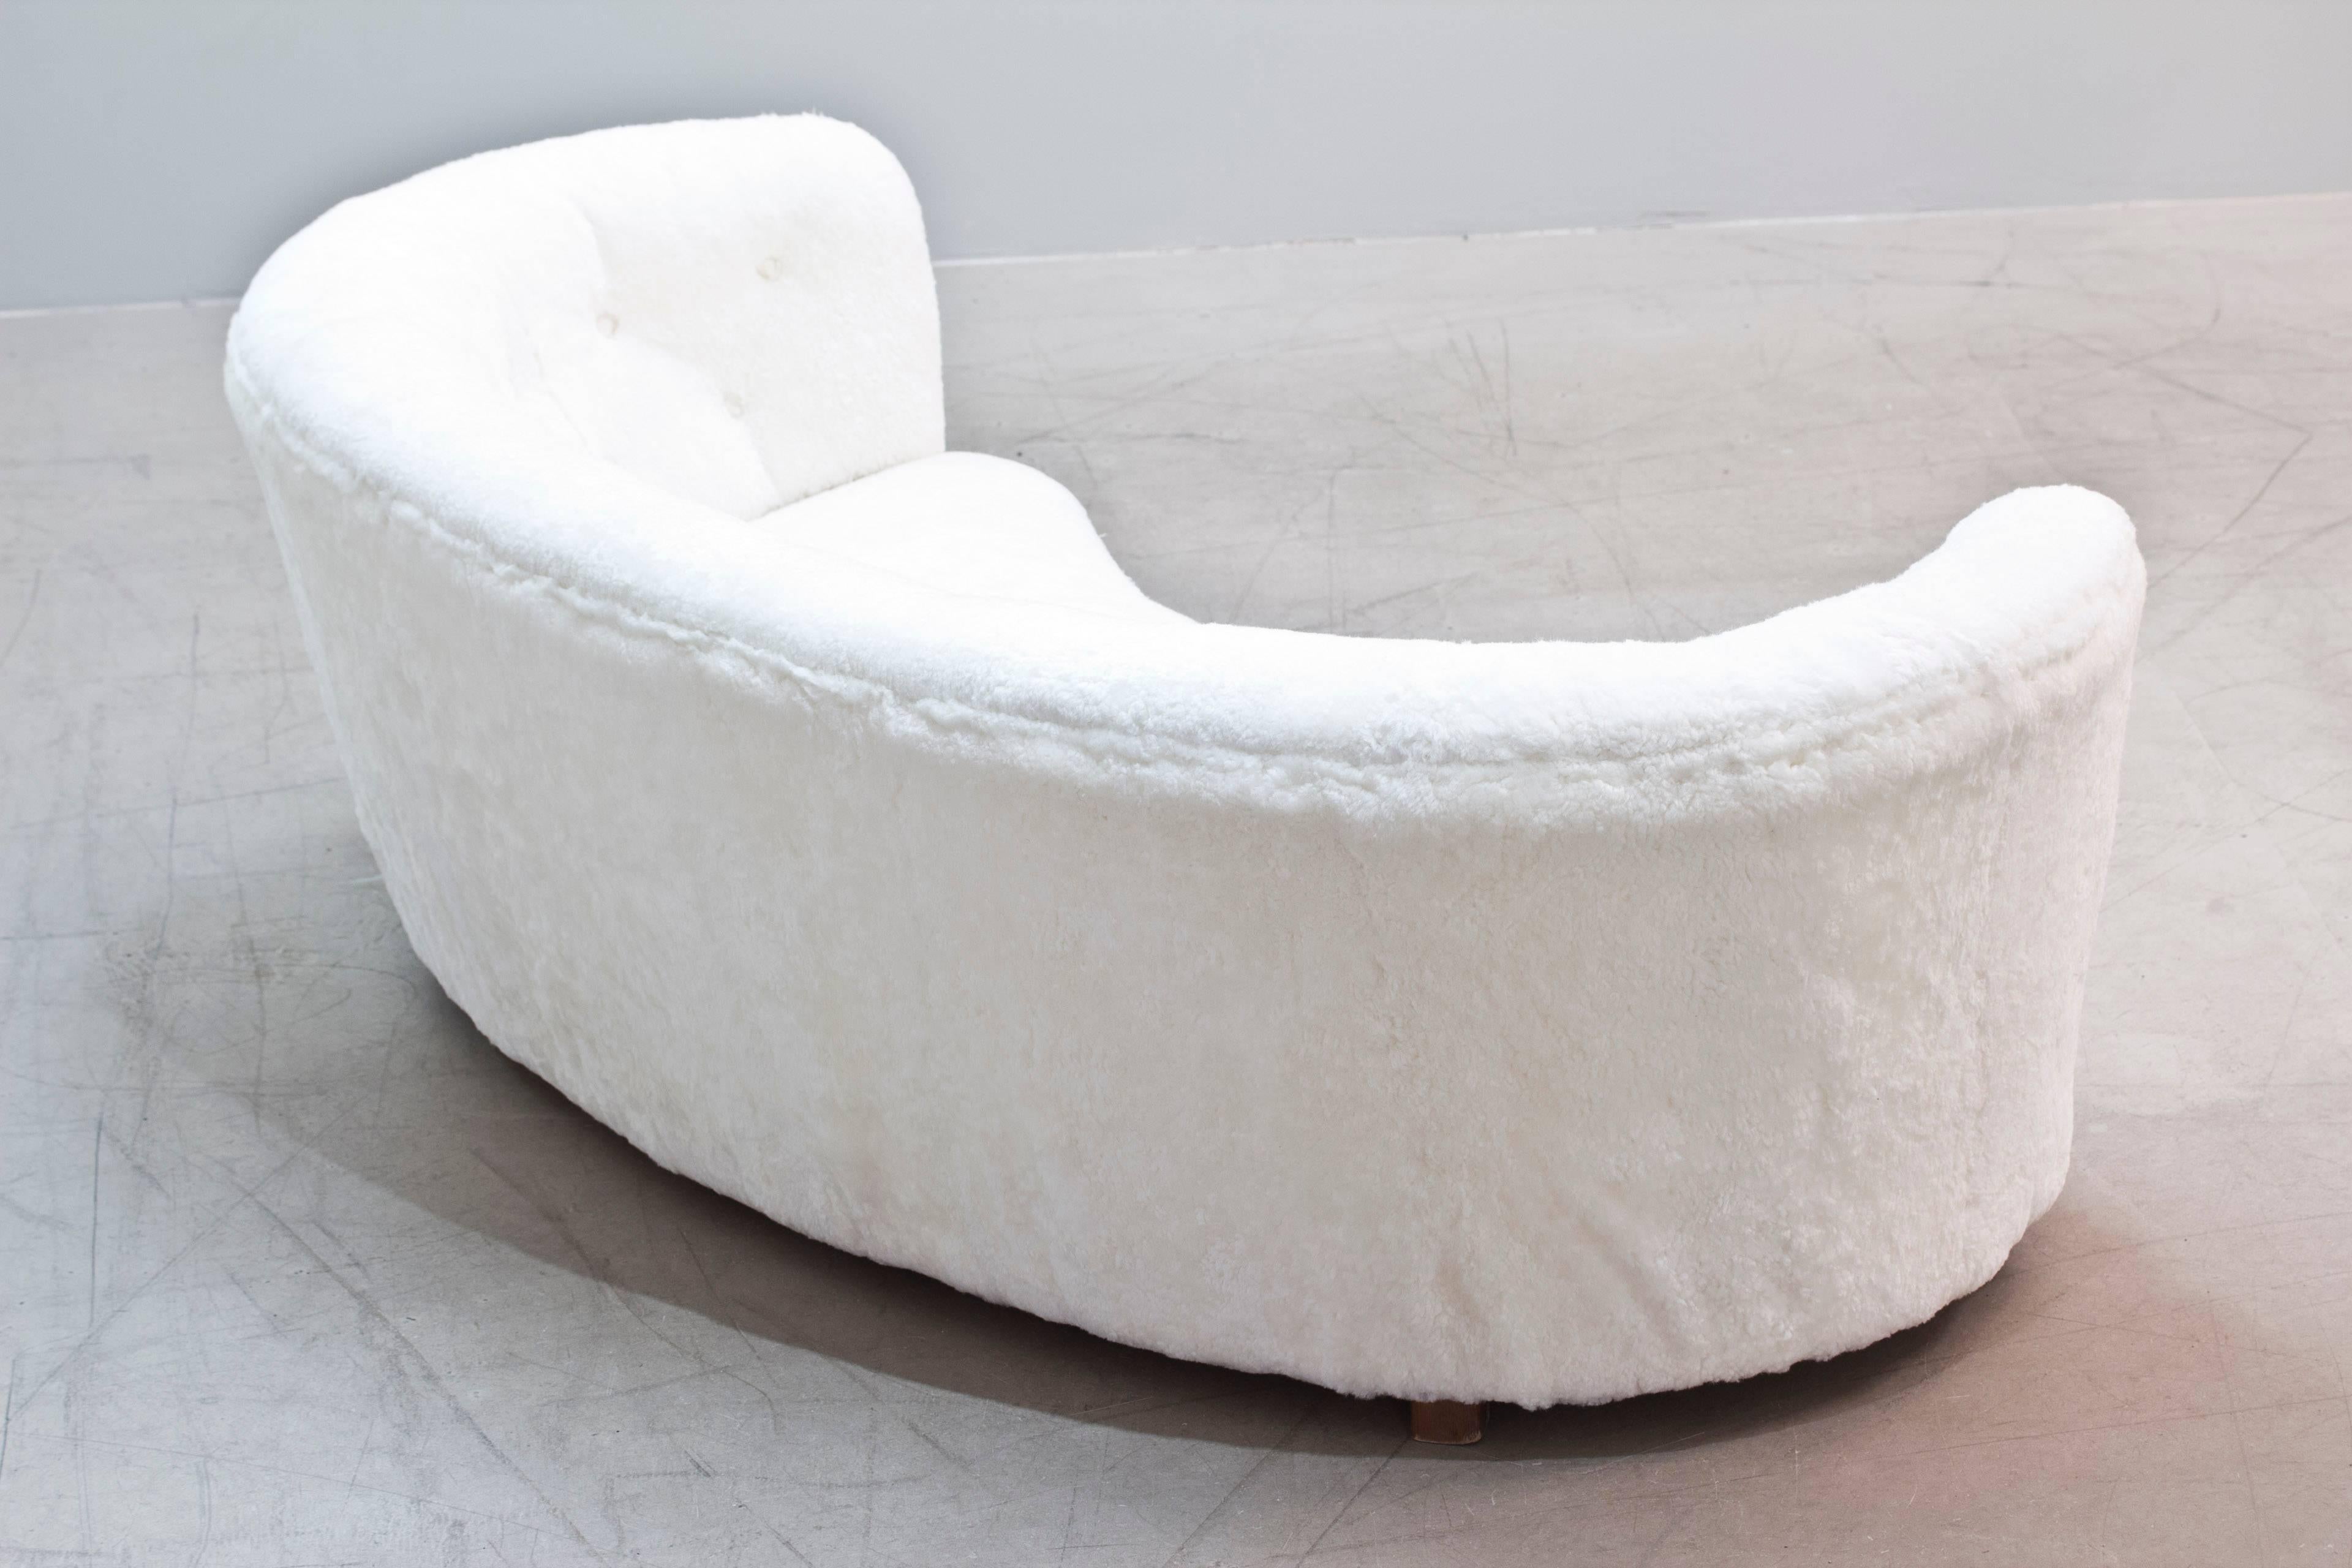 Swedish Modern curved sofa newly upholstered in white sheepskin with wooden structure and feet, circa 1930s.